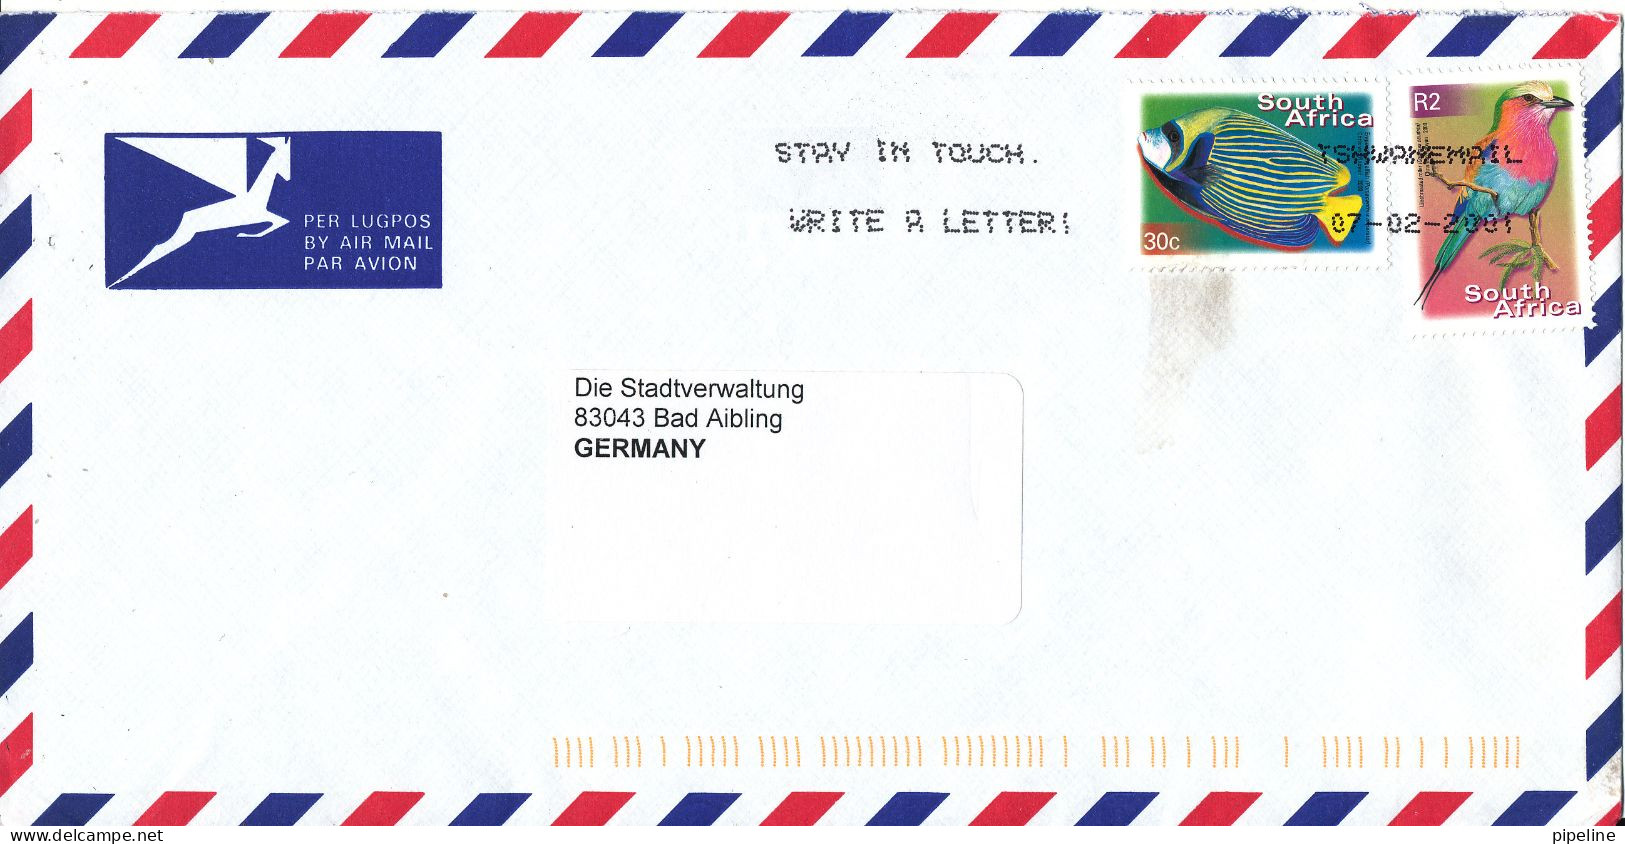 South Africa Air Mail Cover Sent To Germany 7-2-2001 Topic Stamps BIRD And FISH - Airmail